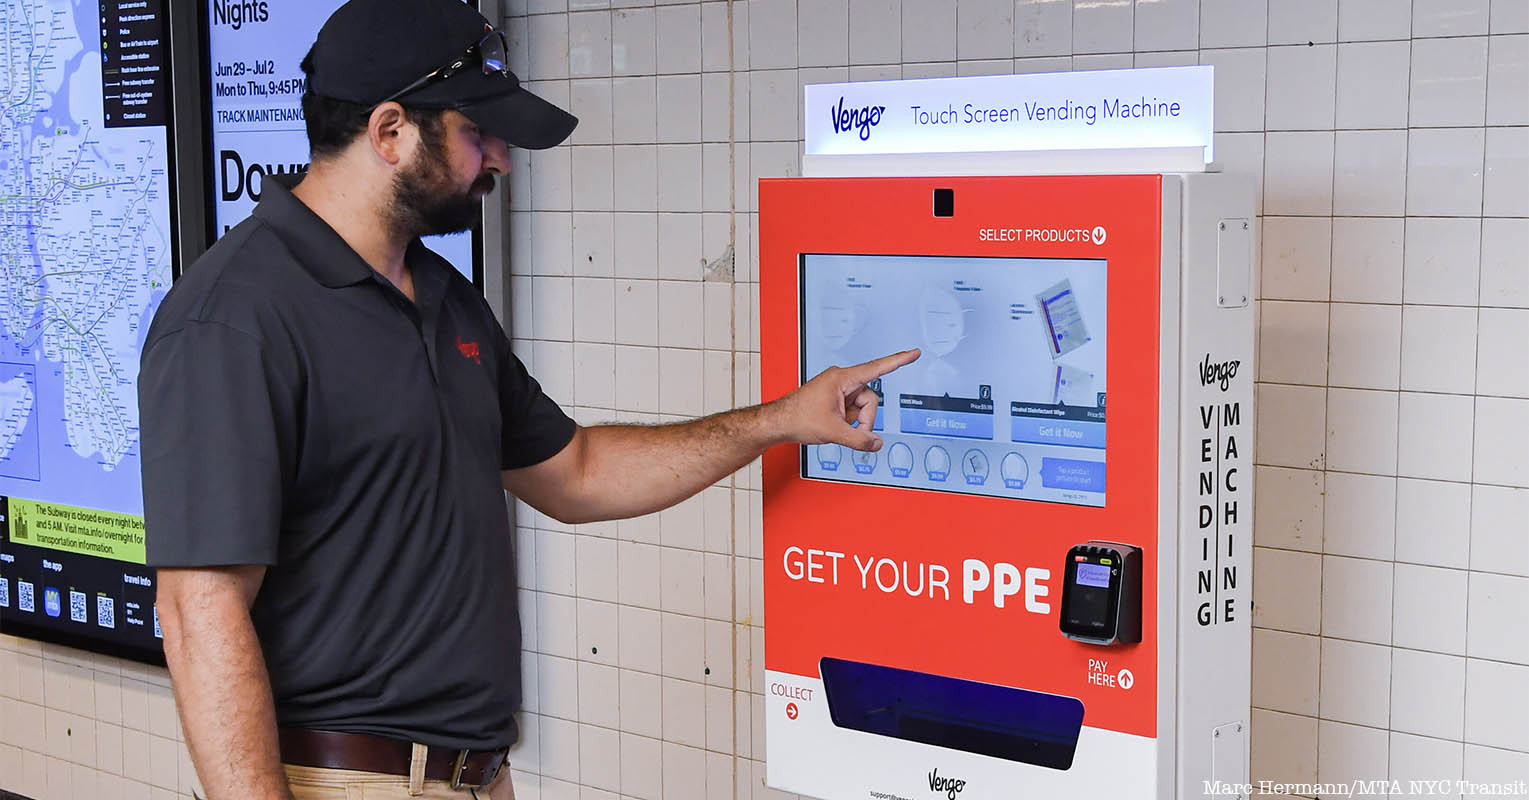 PPE Vending Machine in nyc subway